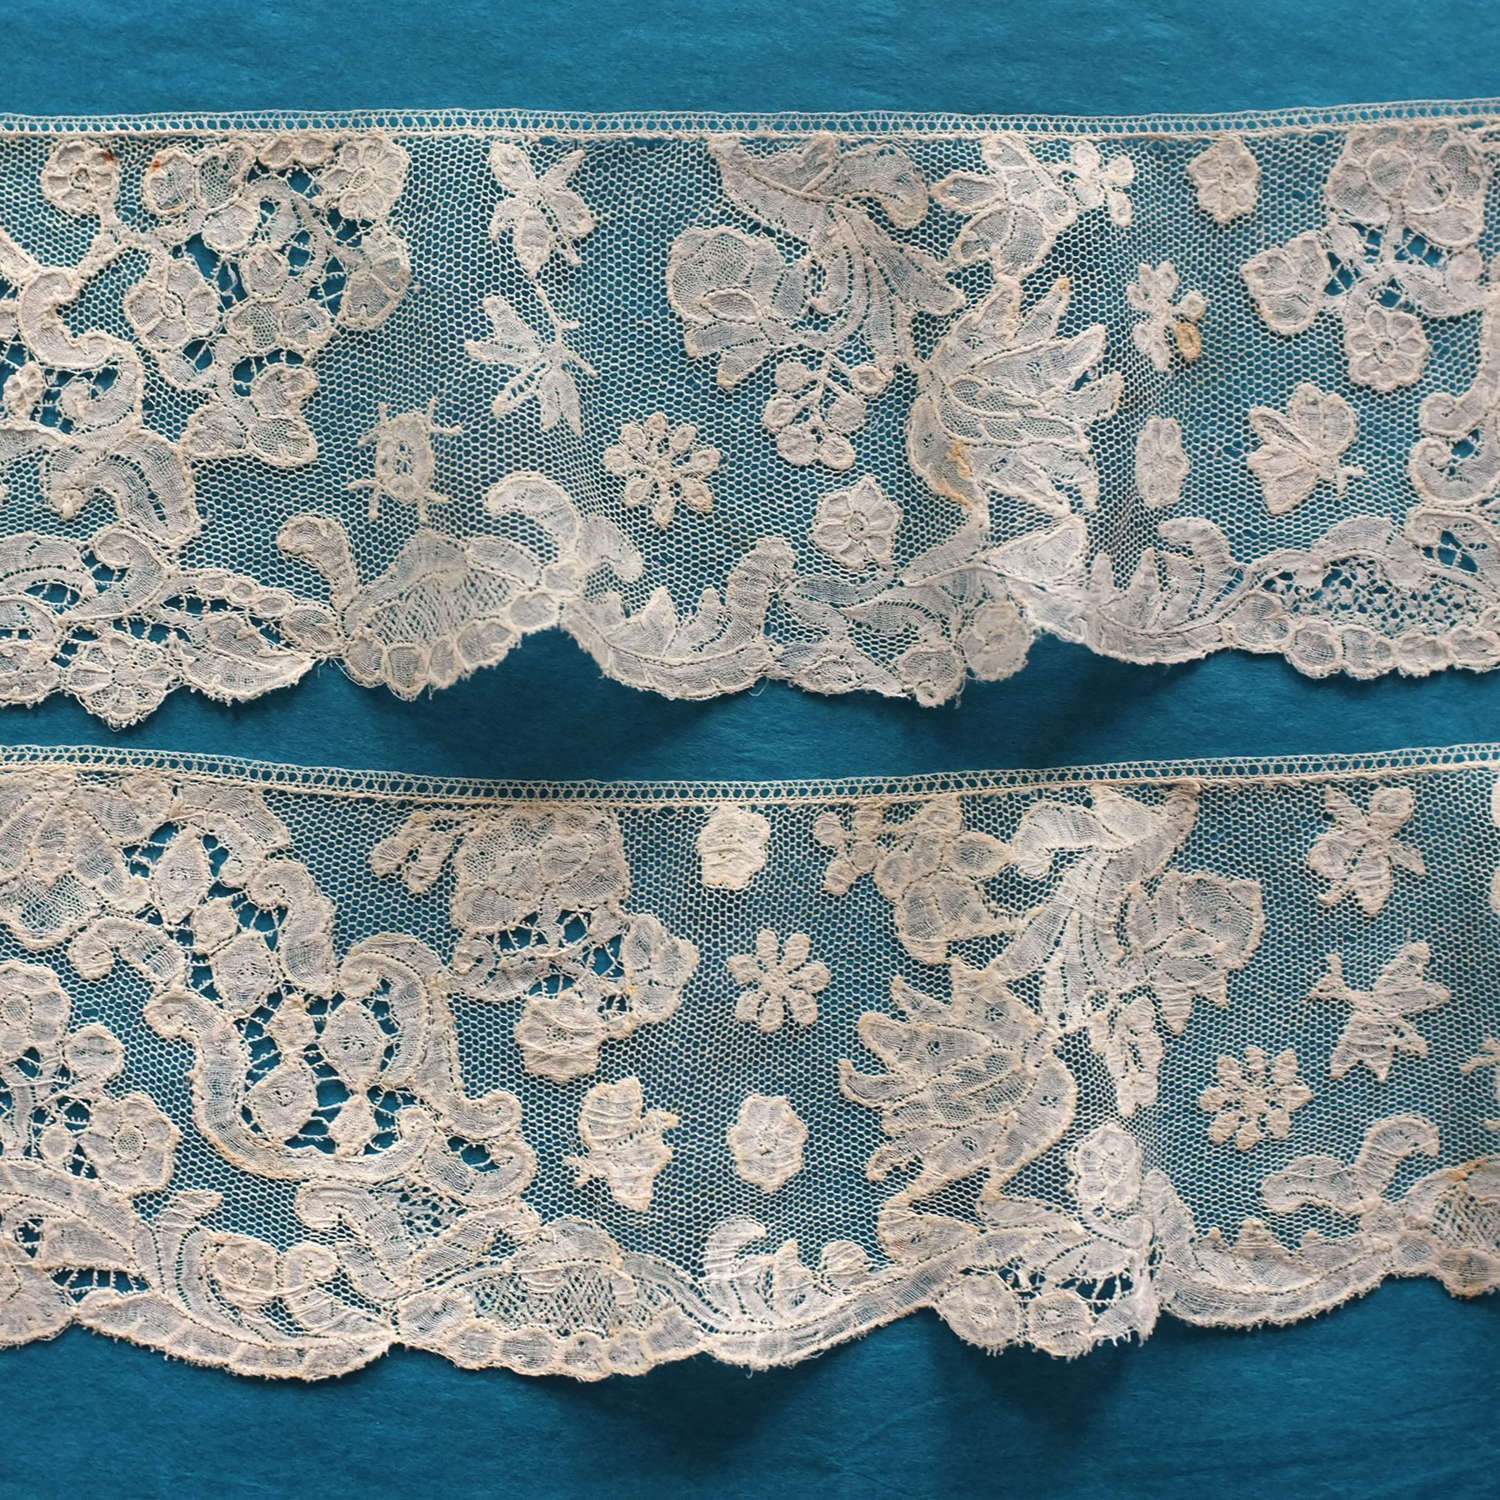 Antique 18th Century Brussels Bobbin Lace Border with Butterflies